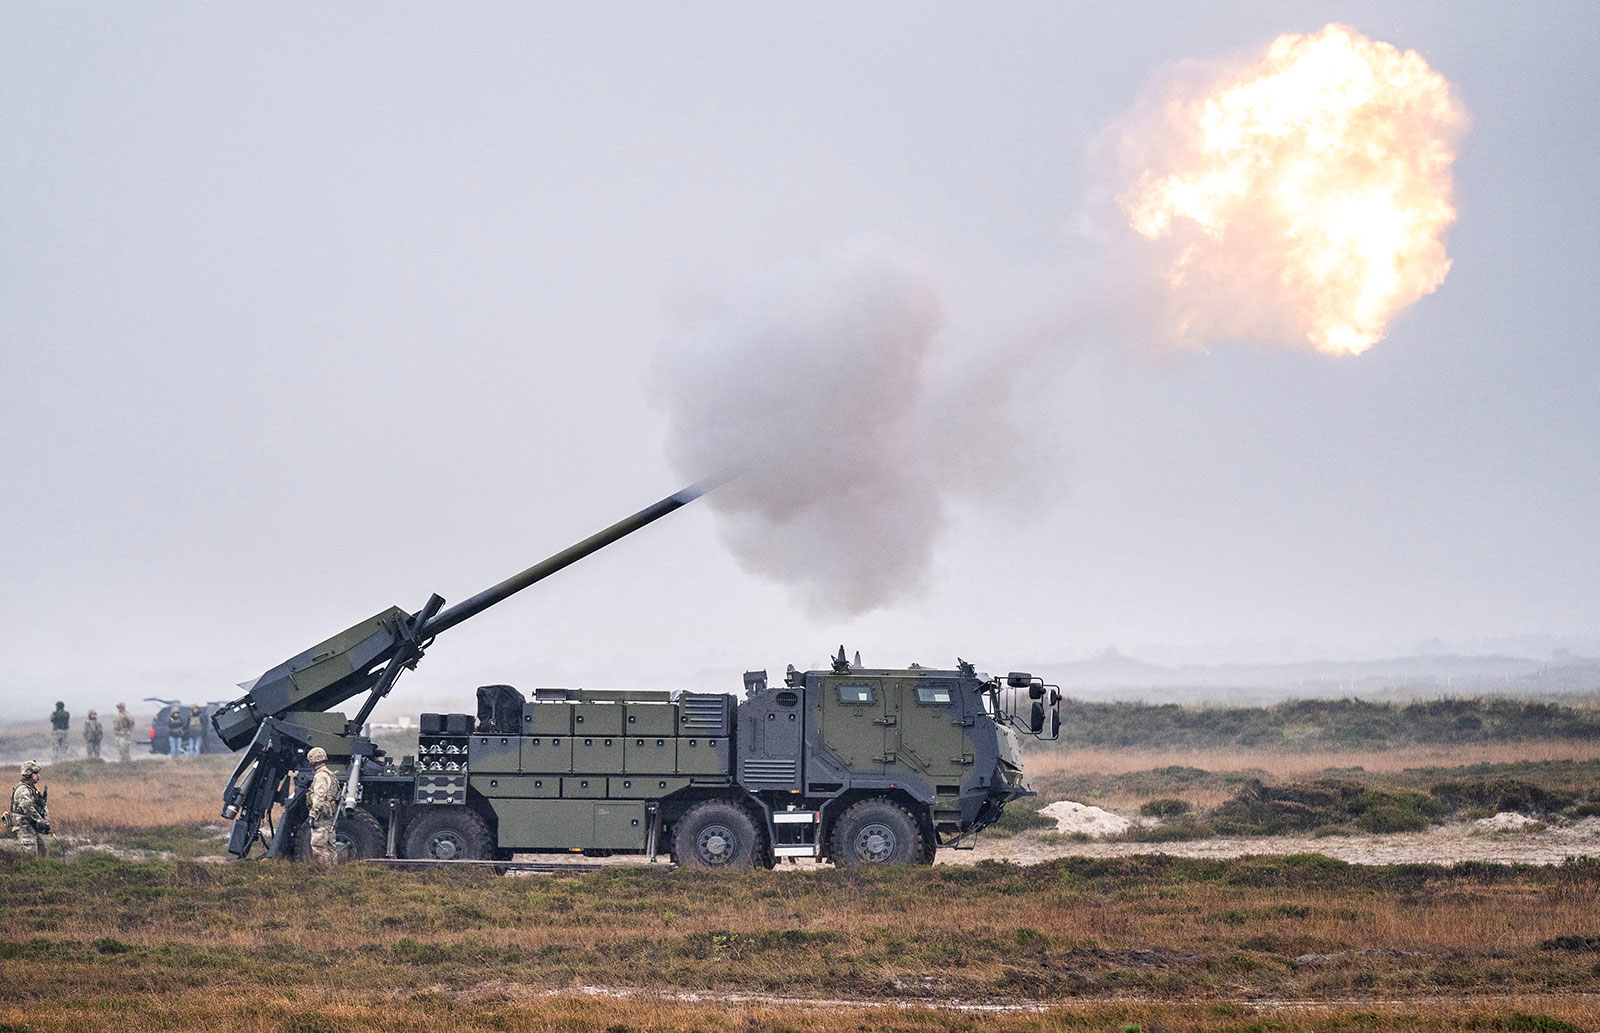 This file image shows the Danish Army "Forsvaret" presenting their new CAESAR howitzer weapon system in Oksbol, Denmark, in 2021. 